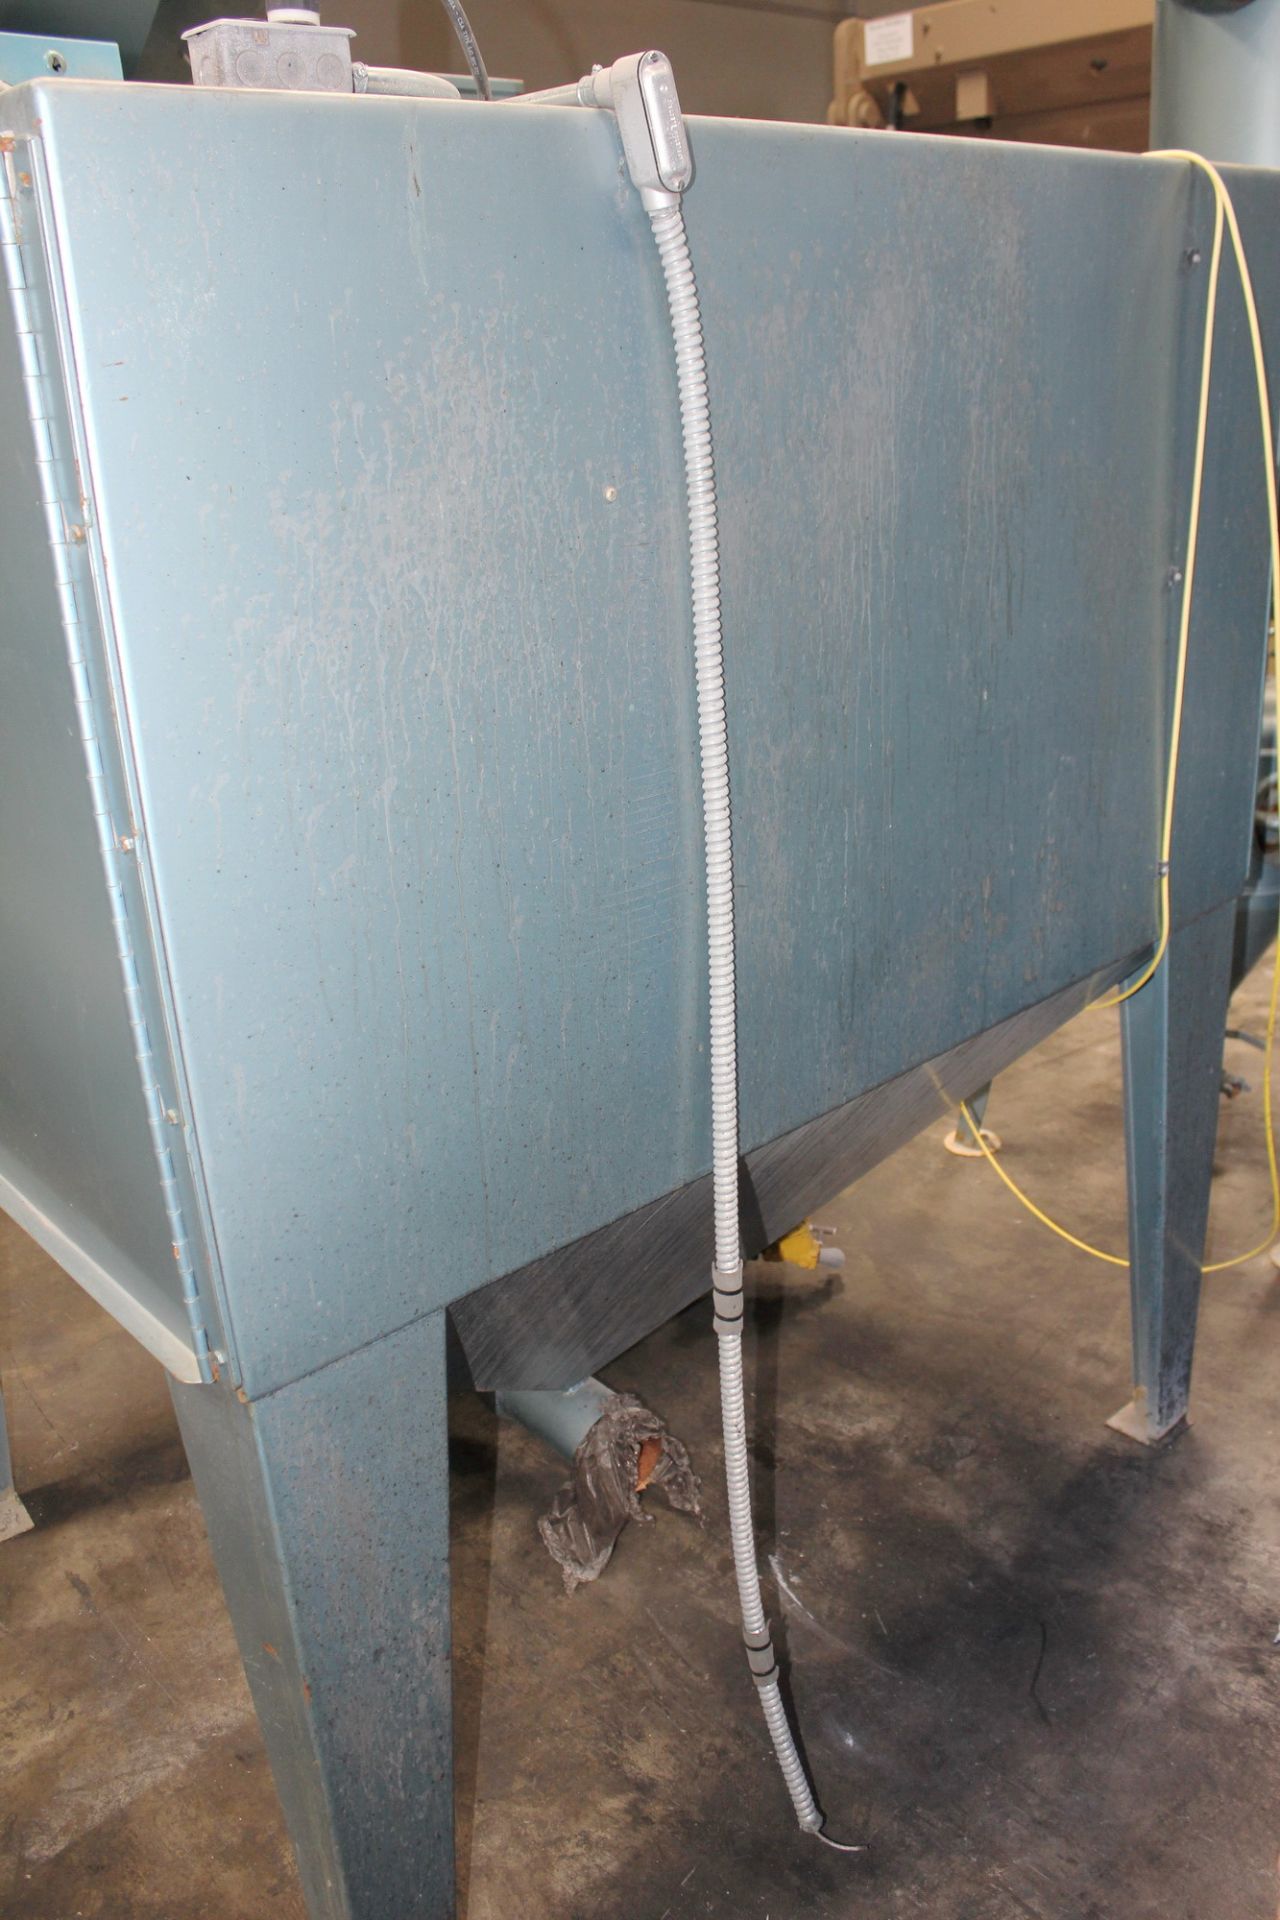 Universal Suction Type Blast Cabinet & Dust Collector | 60" x 48" x 36", Mdl: 60x48x36PDH-DC200, S/ - Image 8 of 20